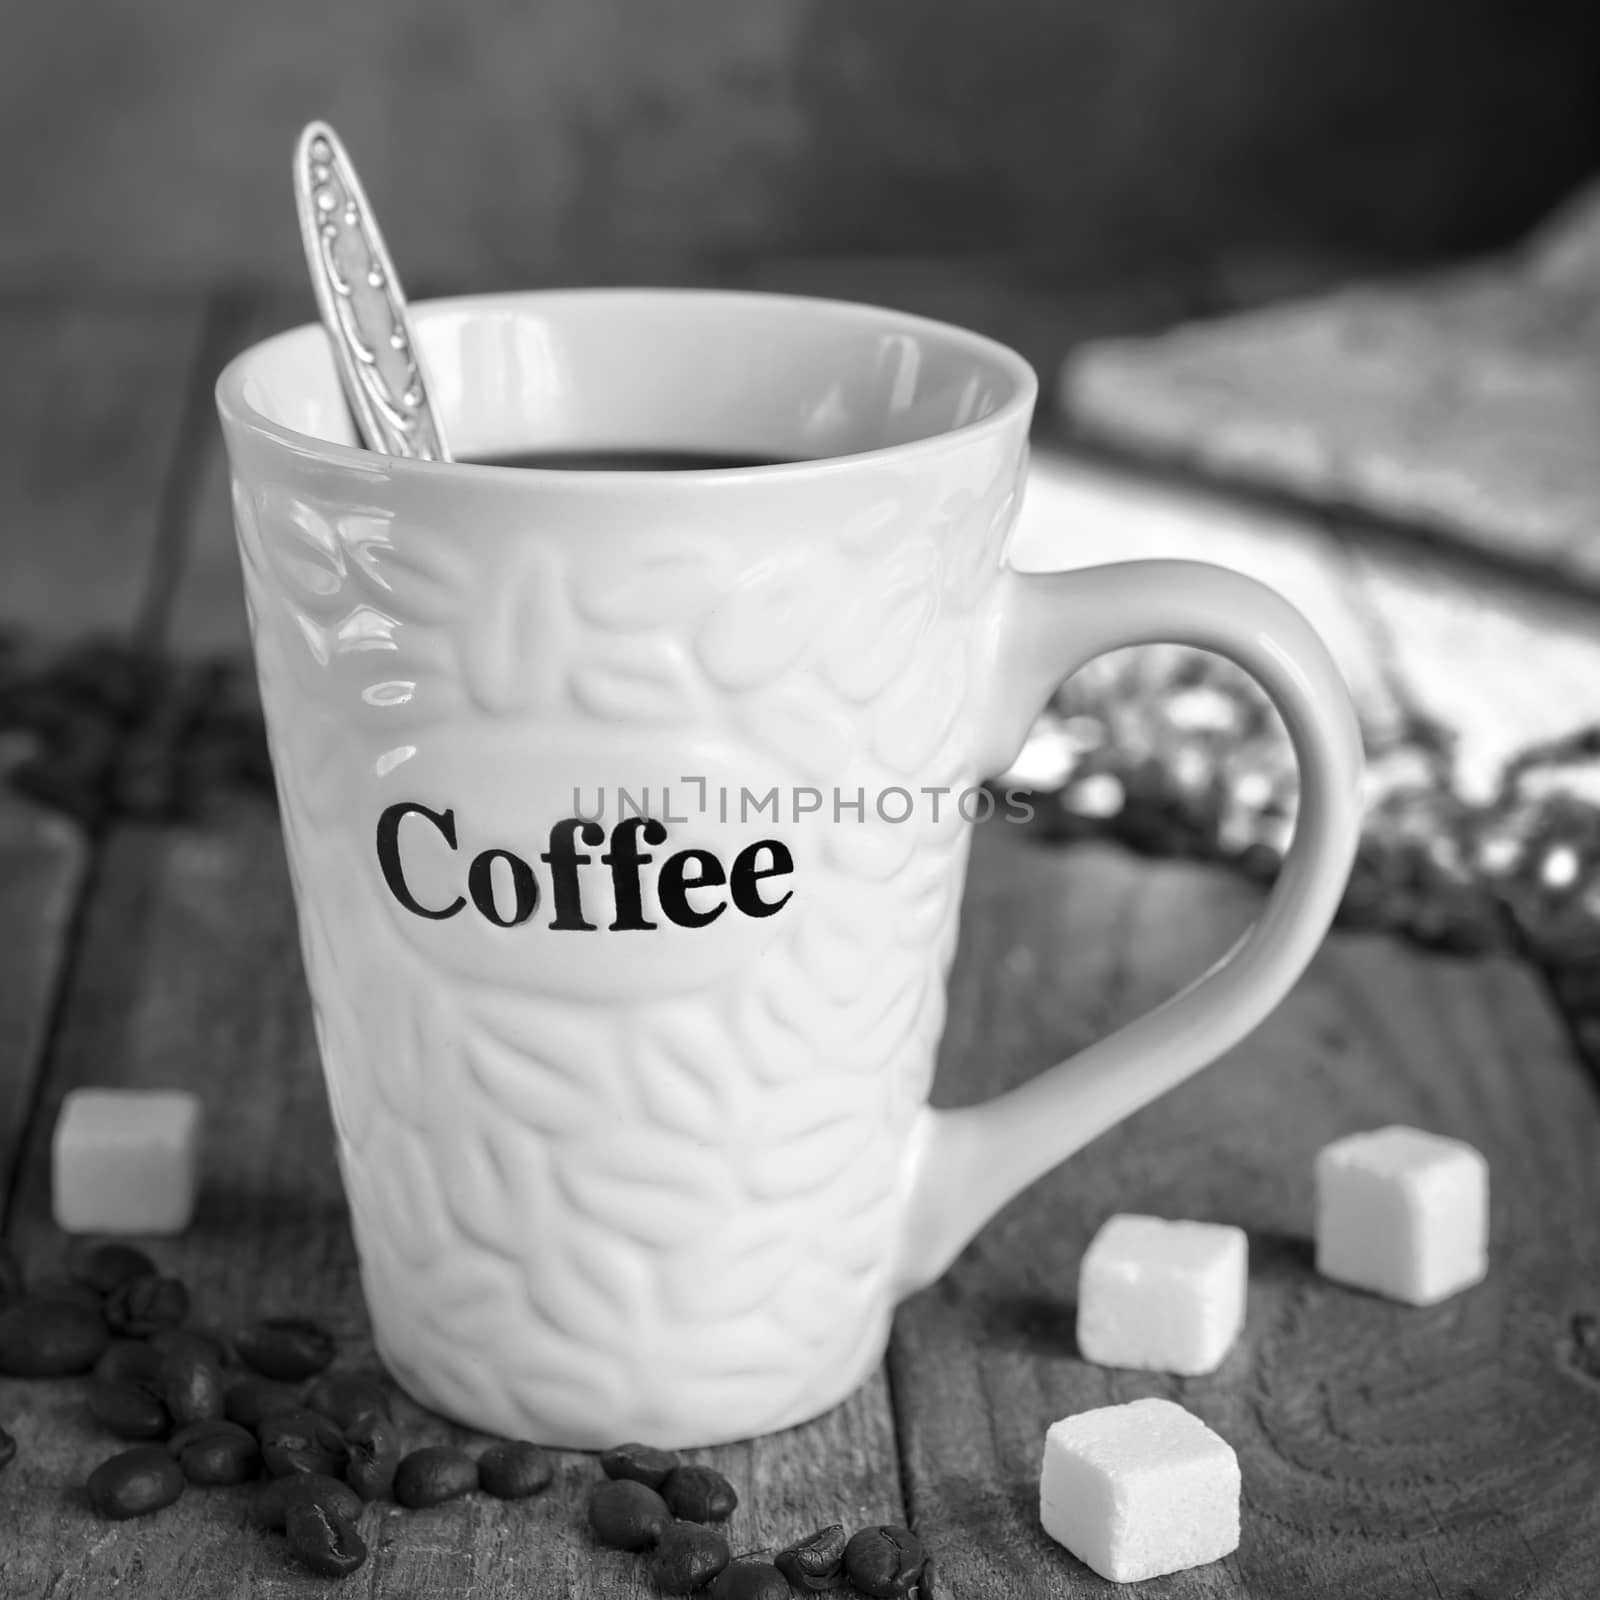 Mug of coffee on the old boards, black-and-white image by Gaina